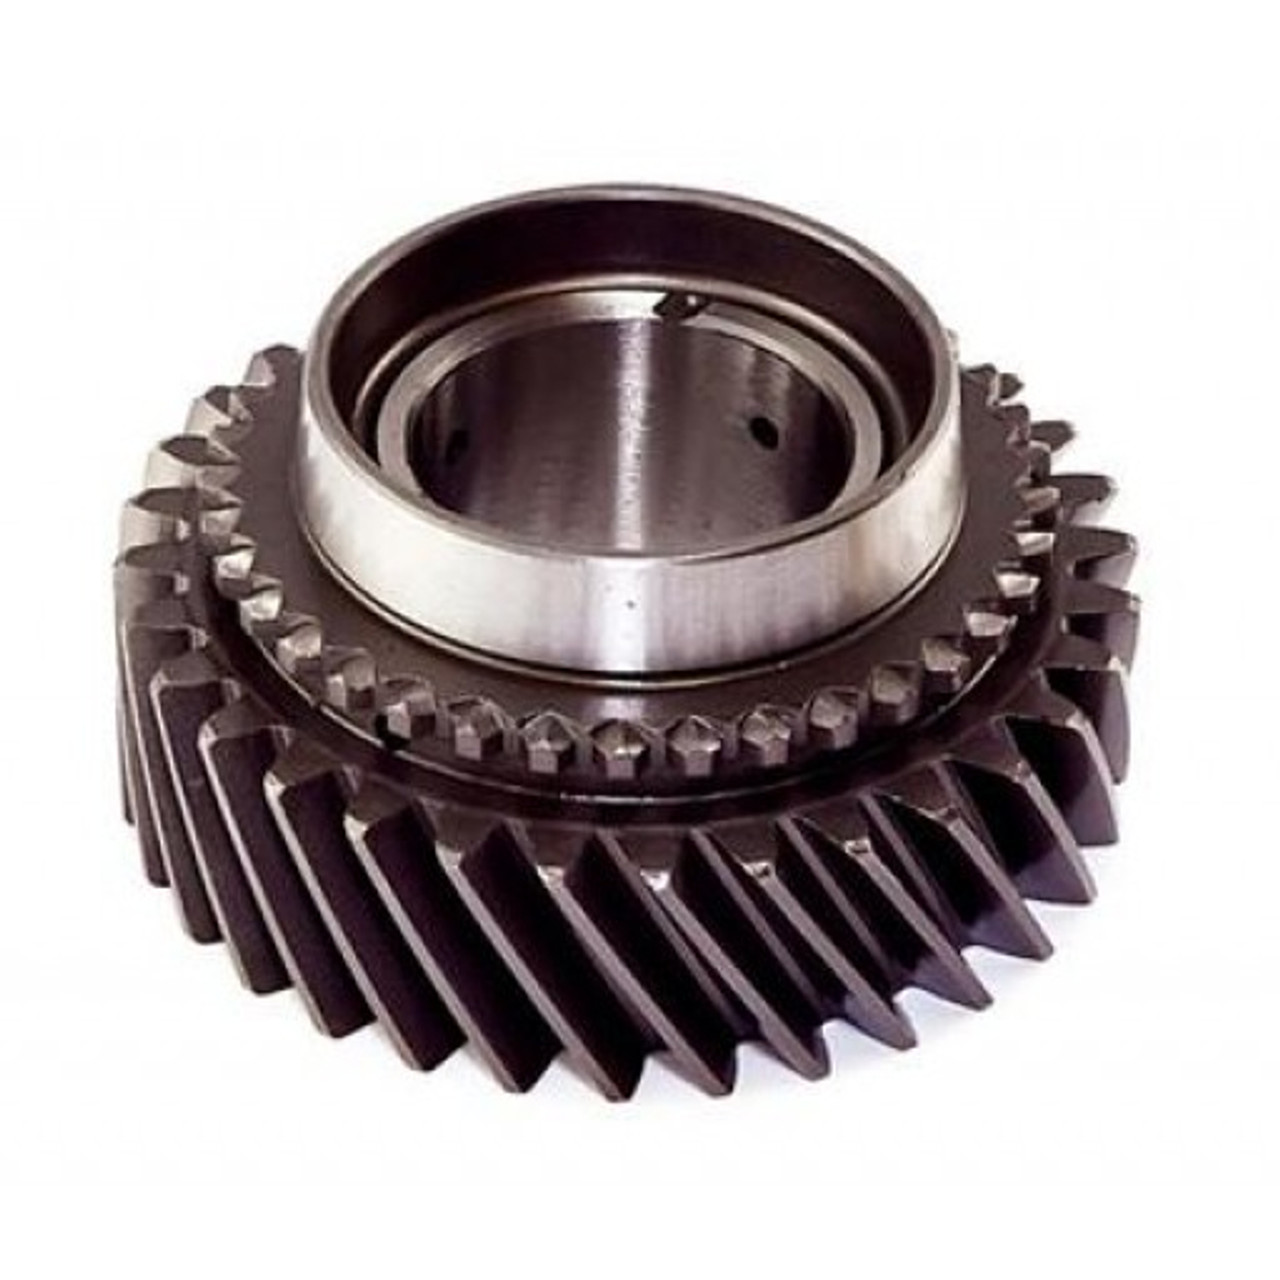 2nd Gear for T-176 (33 Teeth)